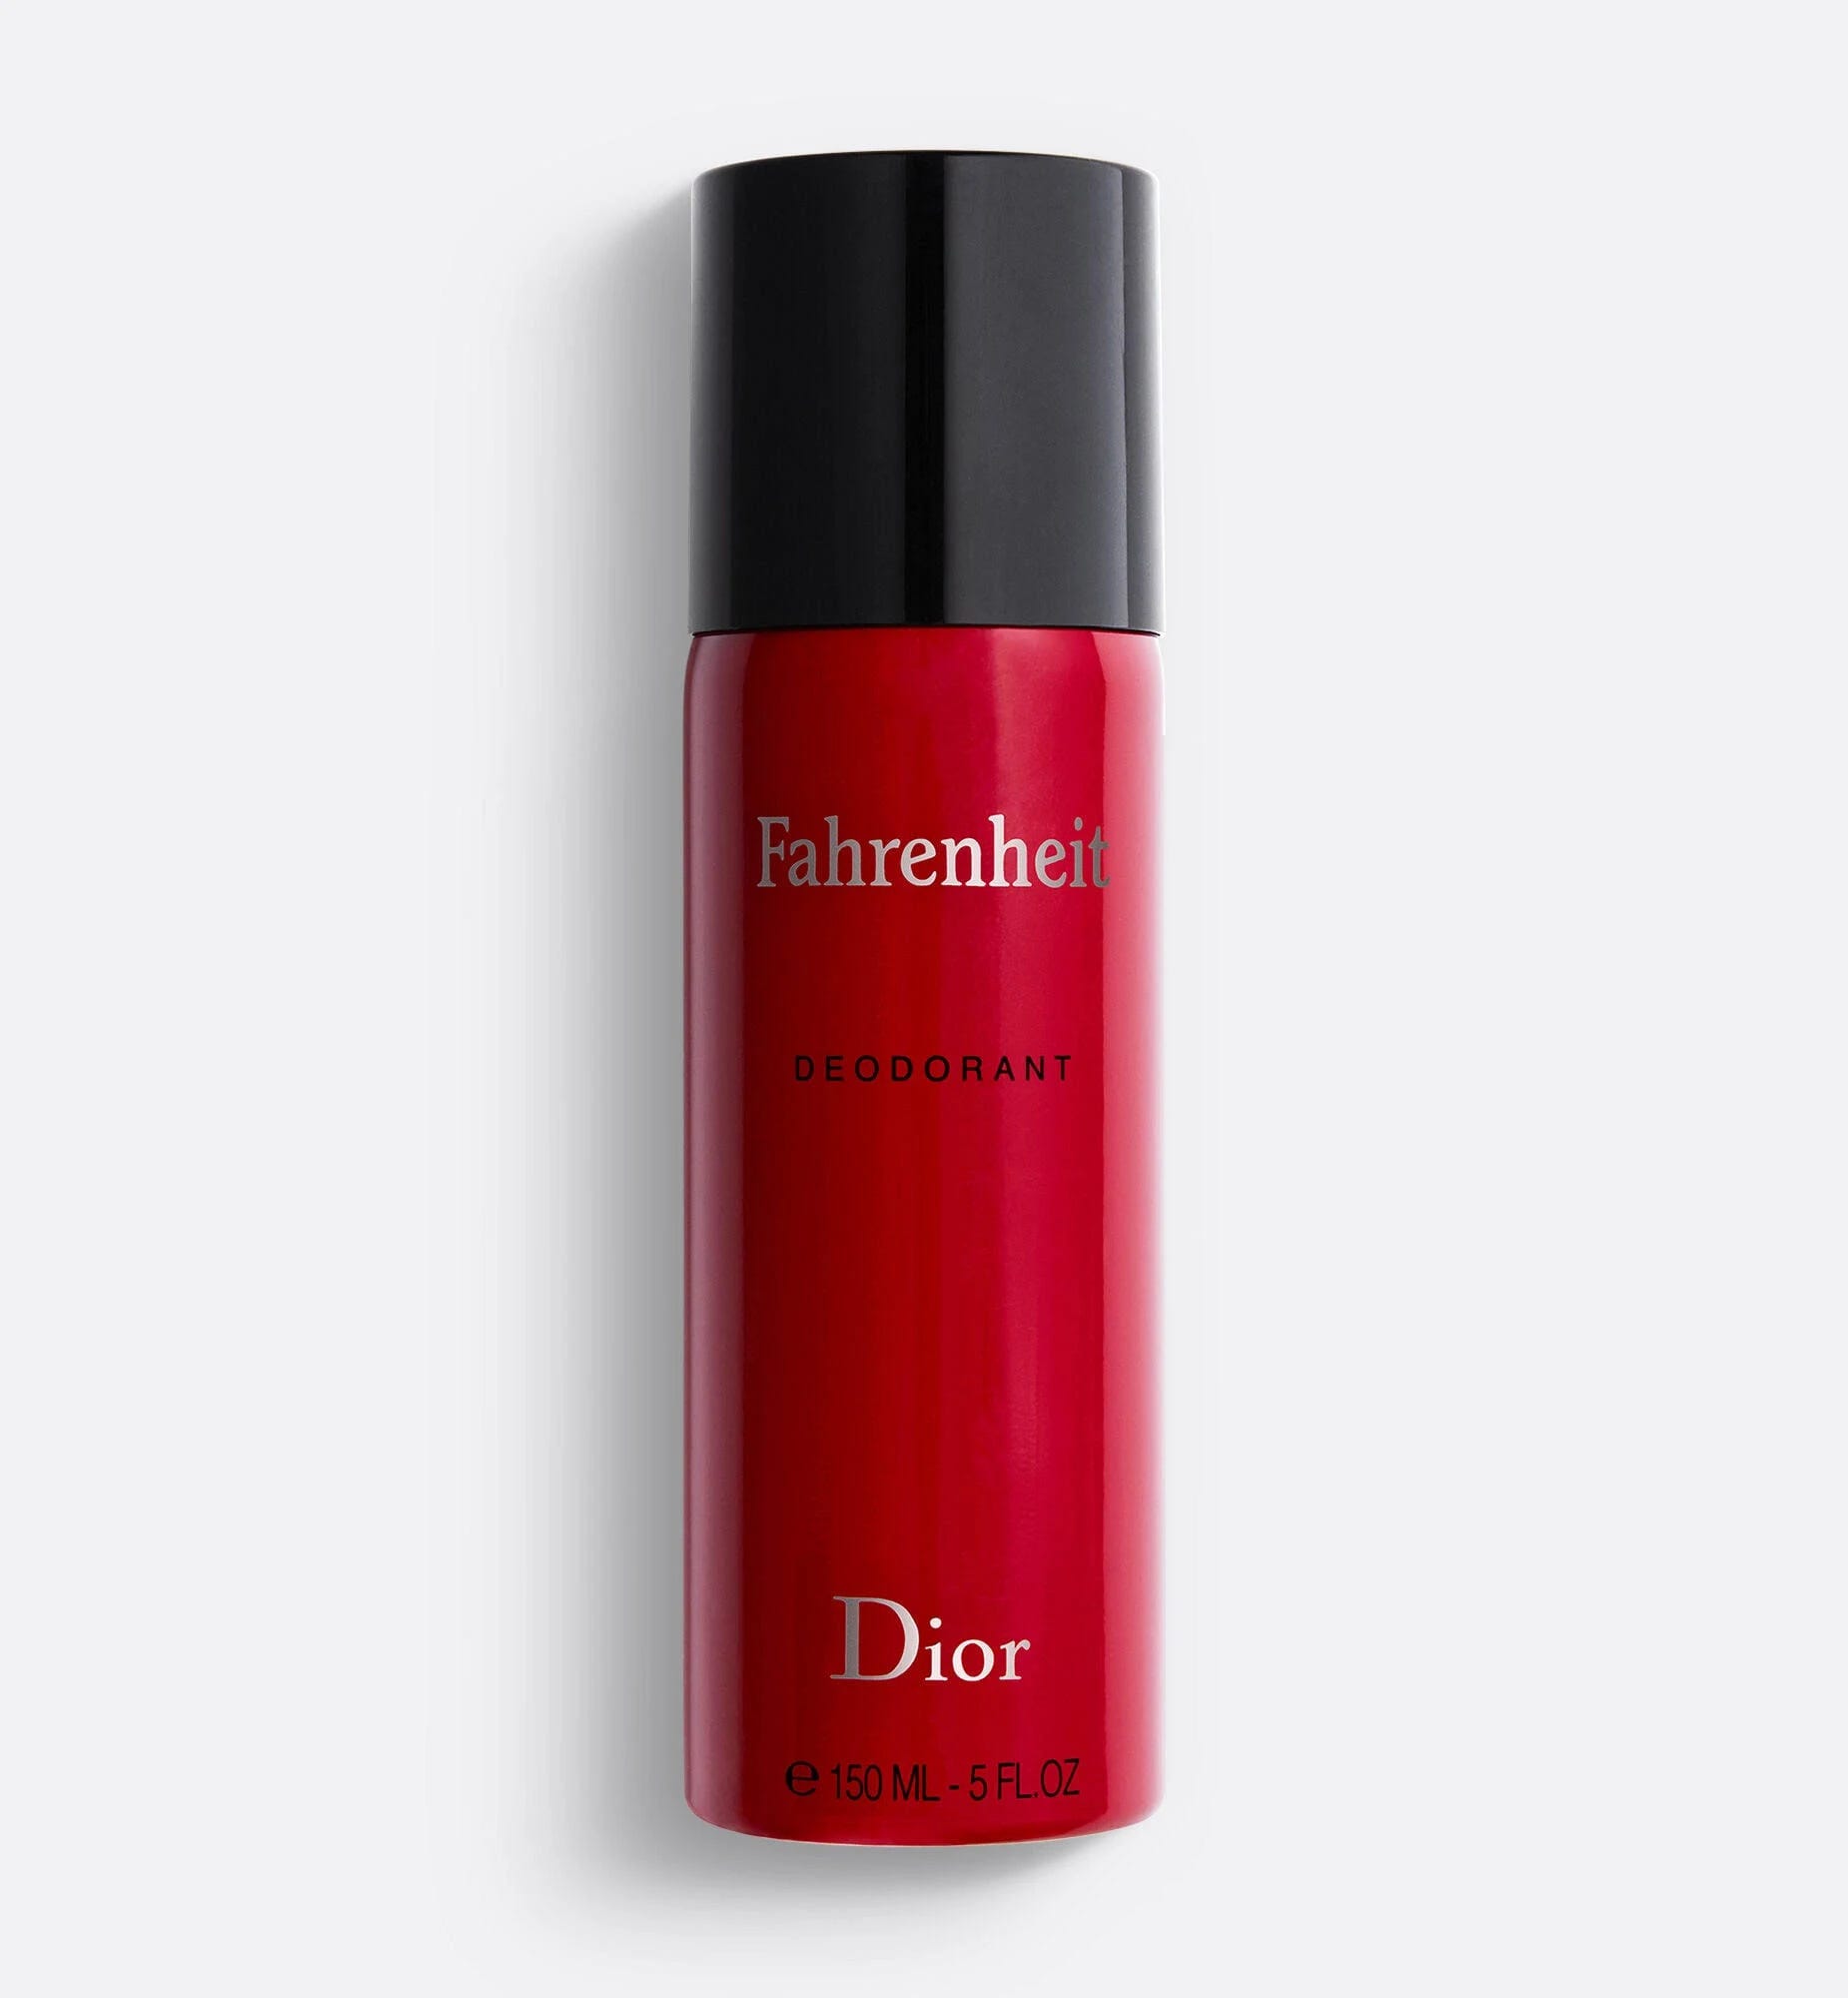 Fahrenheit Deodorant by Christian Dior: Lasting Protection and Fresh Fragrance | Image